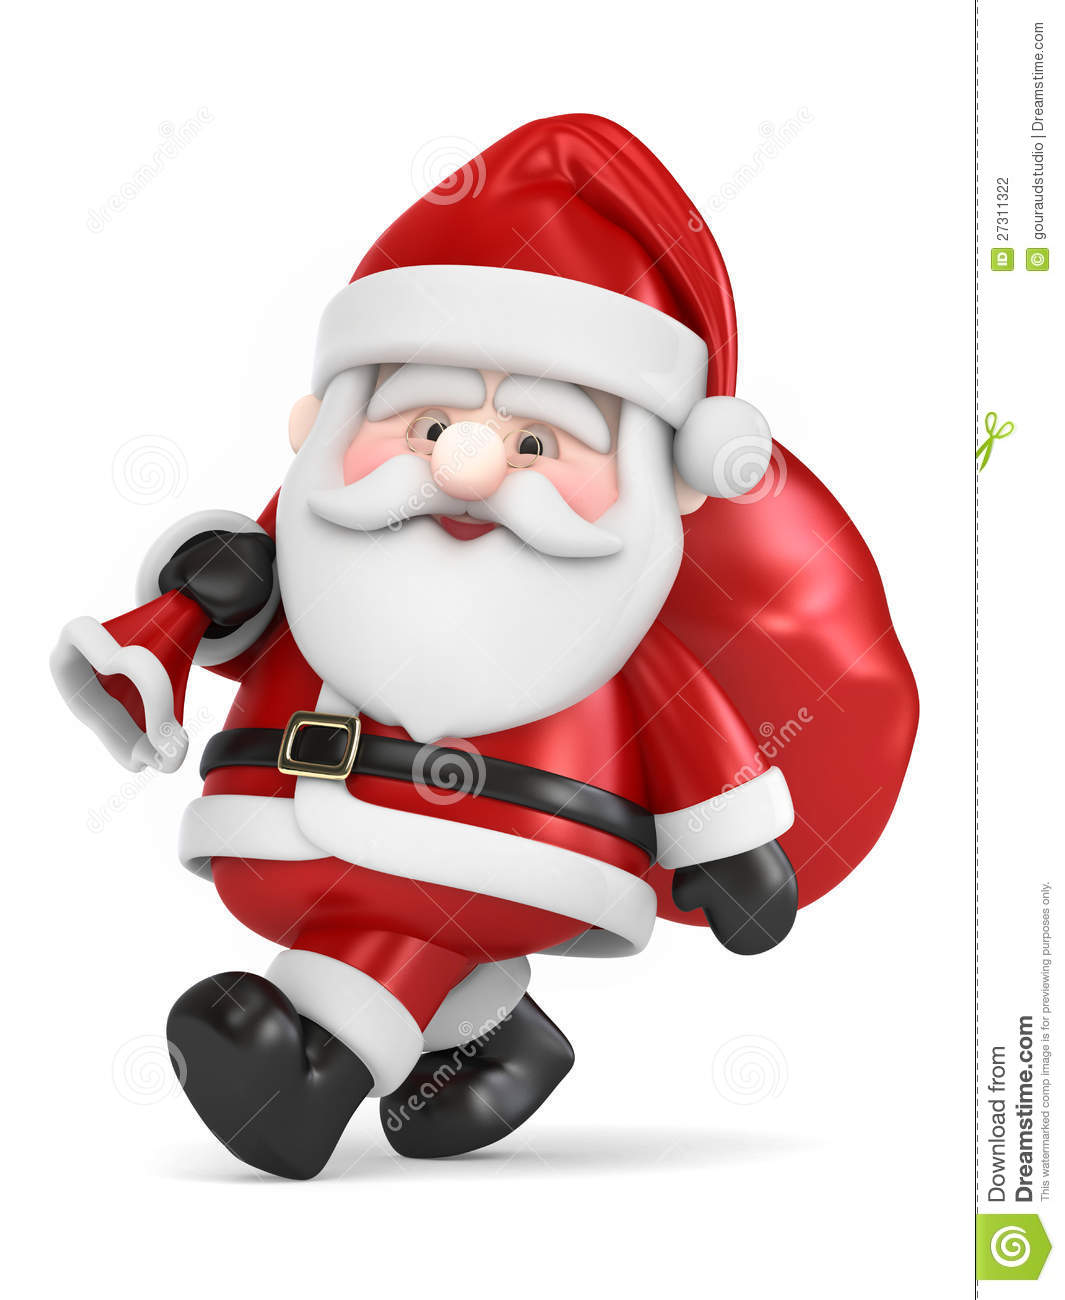 Santa Claus Carrying Bag Of Gifts Stock Photography   Image  27311322